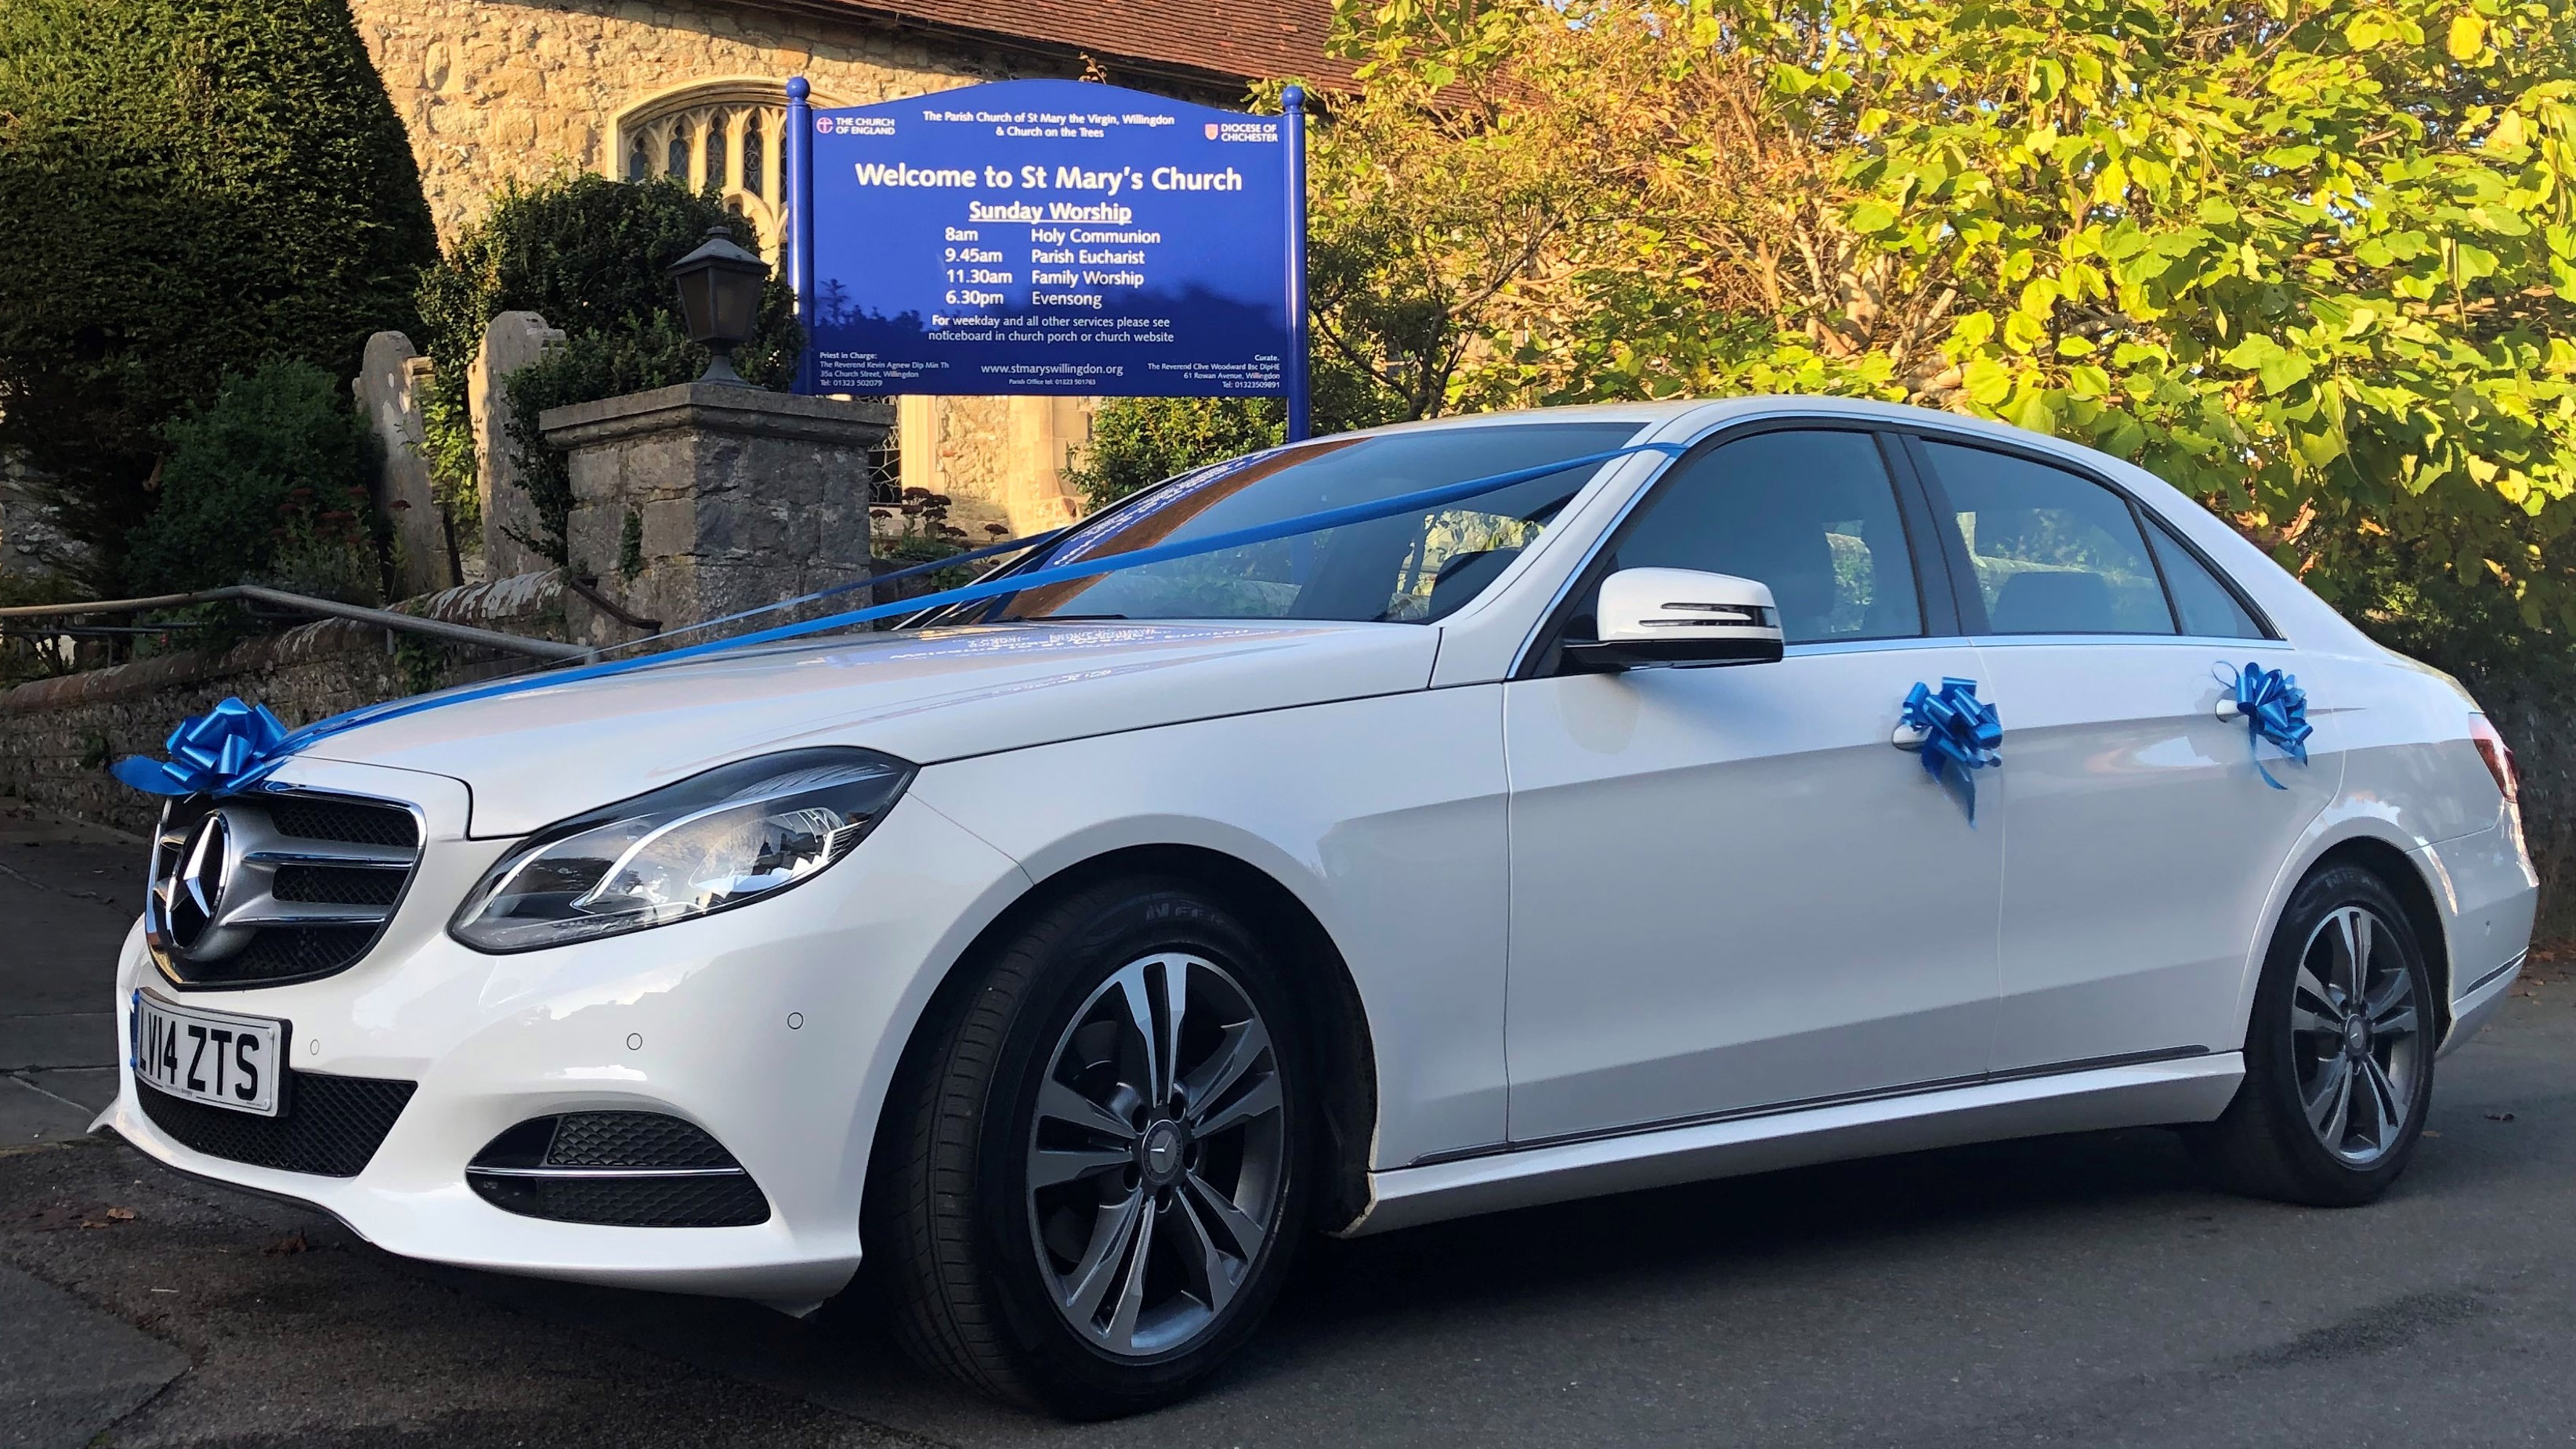 Mercedes E-Class wedding car for hire in Eastbourne, East Sussex